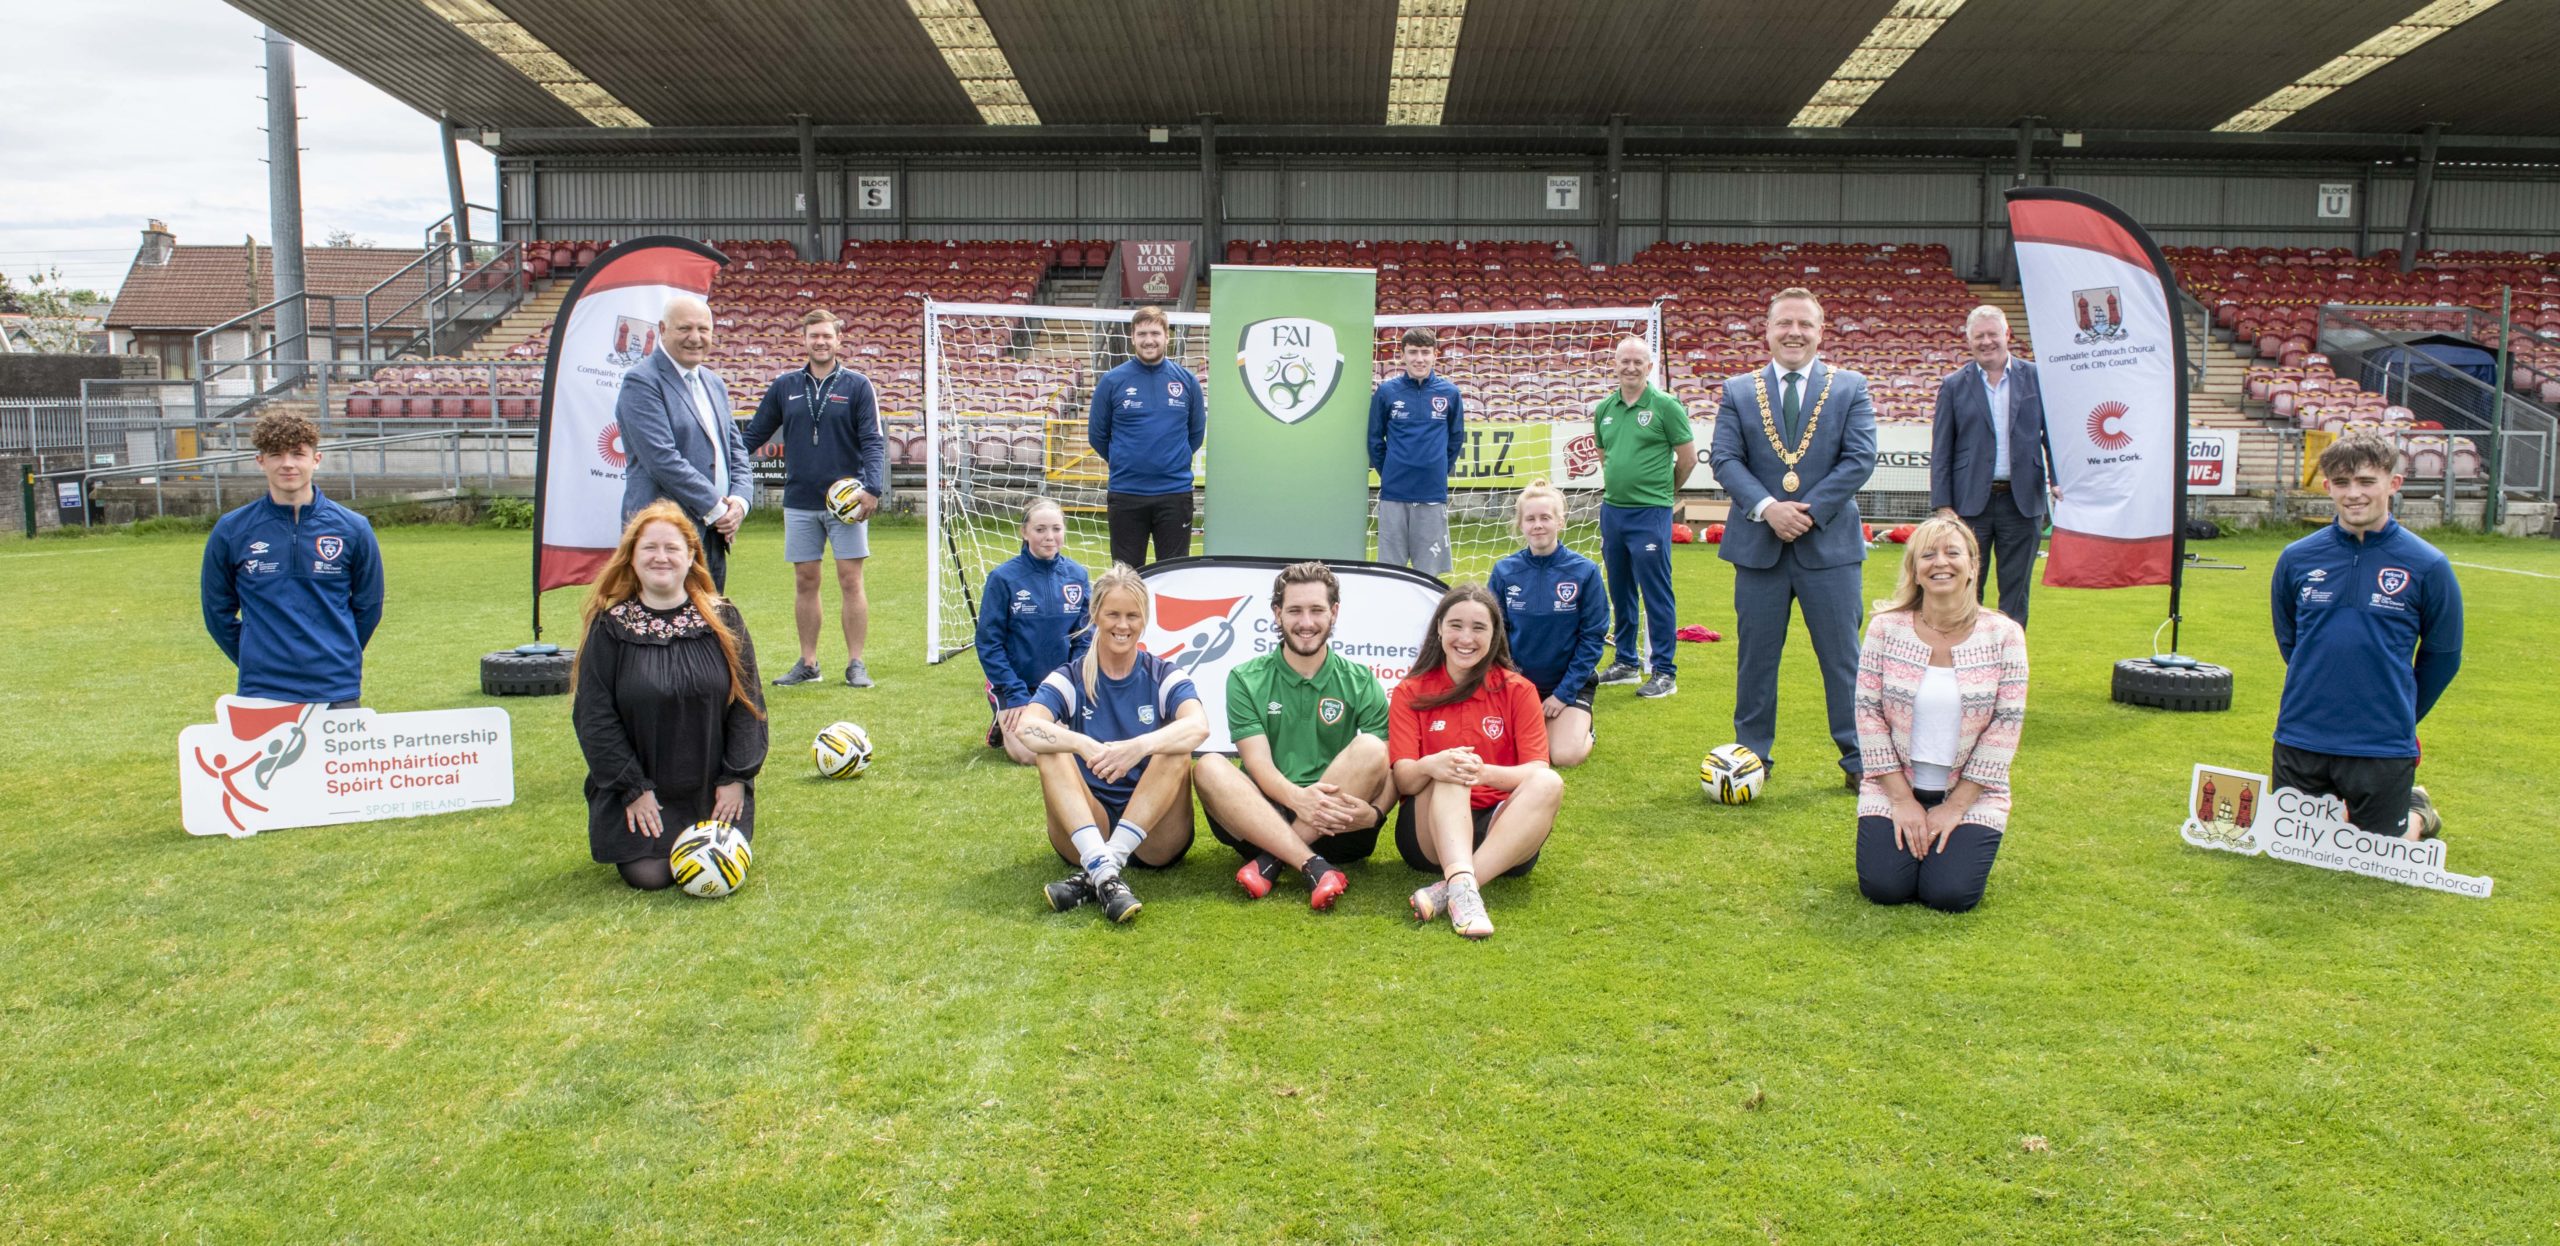 SOCCER: Soccer Youth Leadership Coaching Programme – TheCork.ie (News & Entertainment)